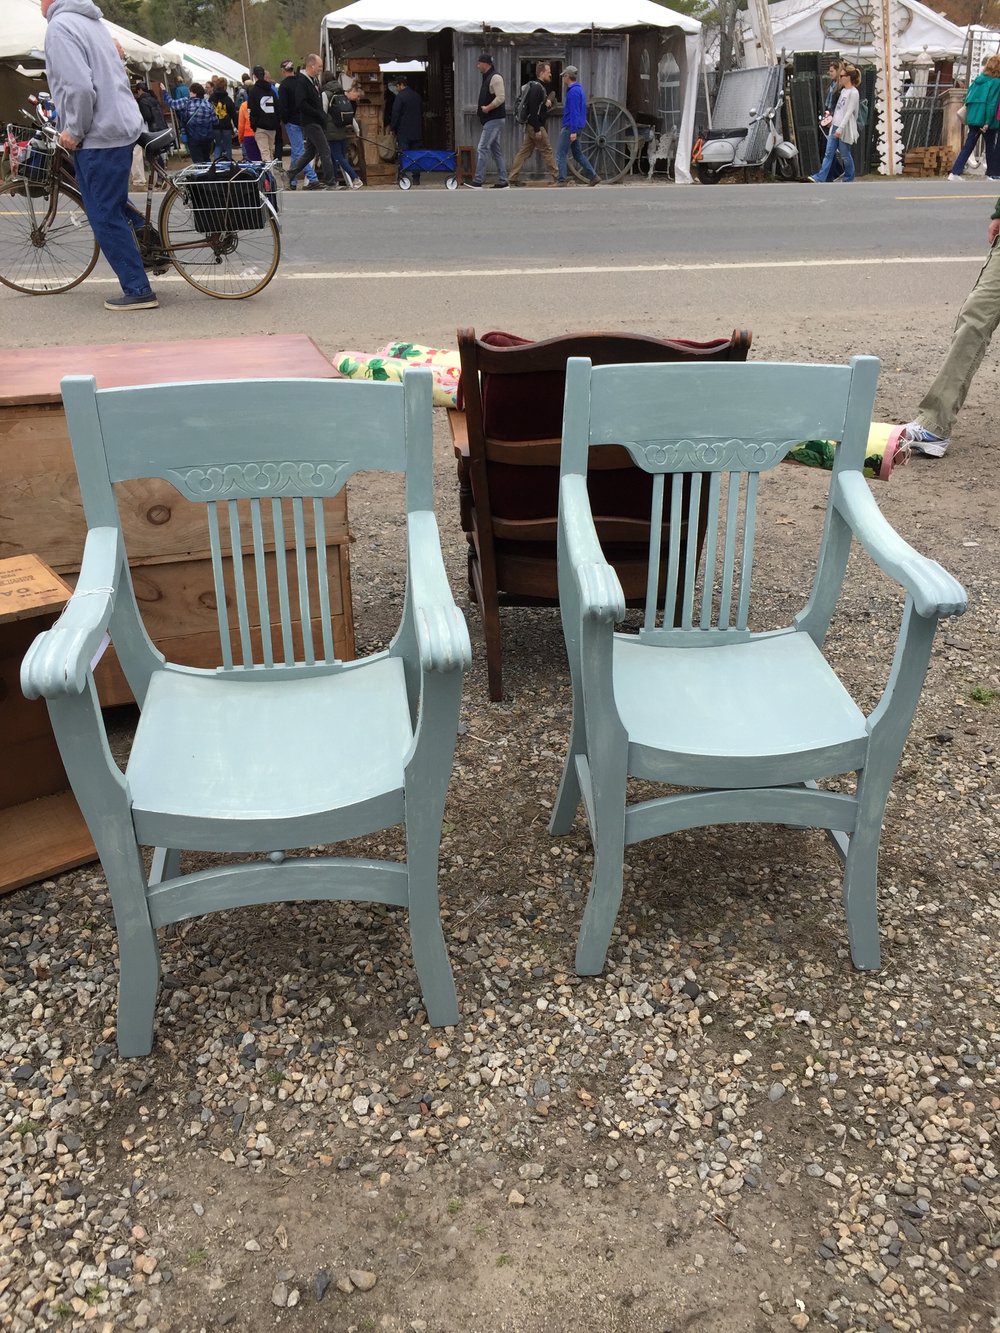  This pair of rustic carule inspired chairs were cute. Love the color. 